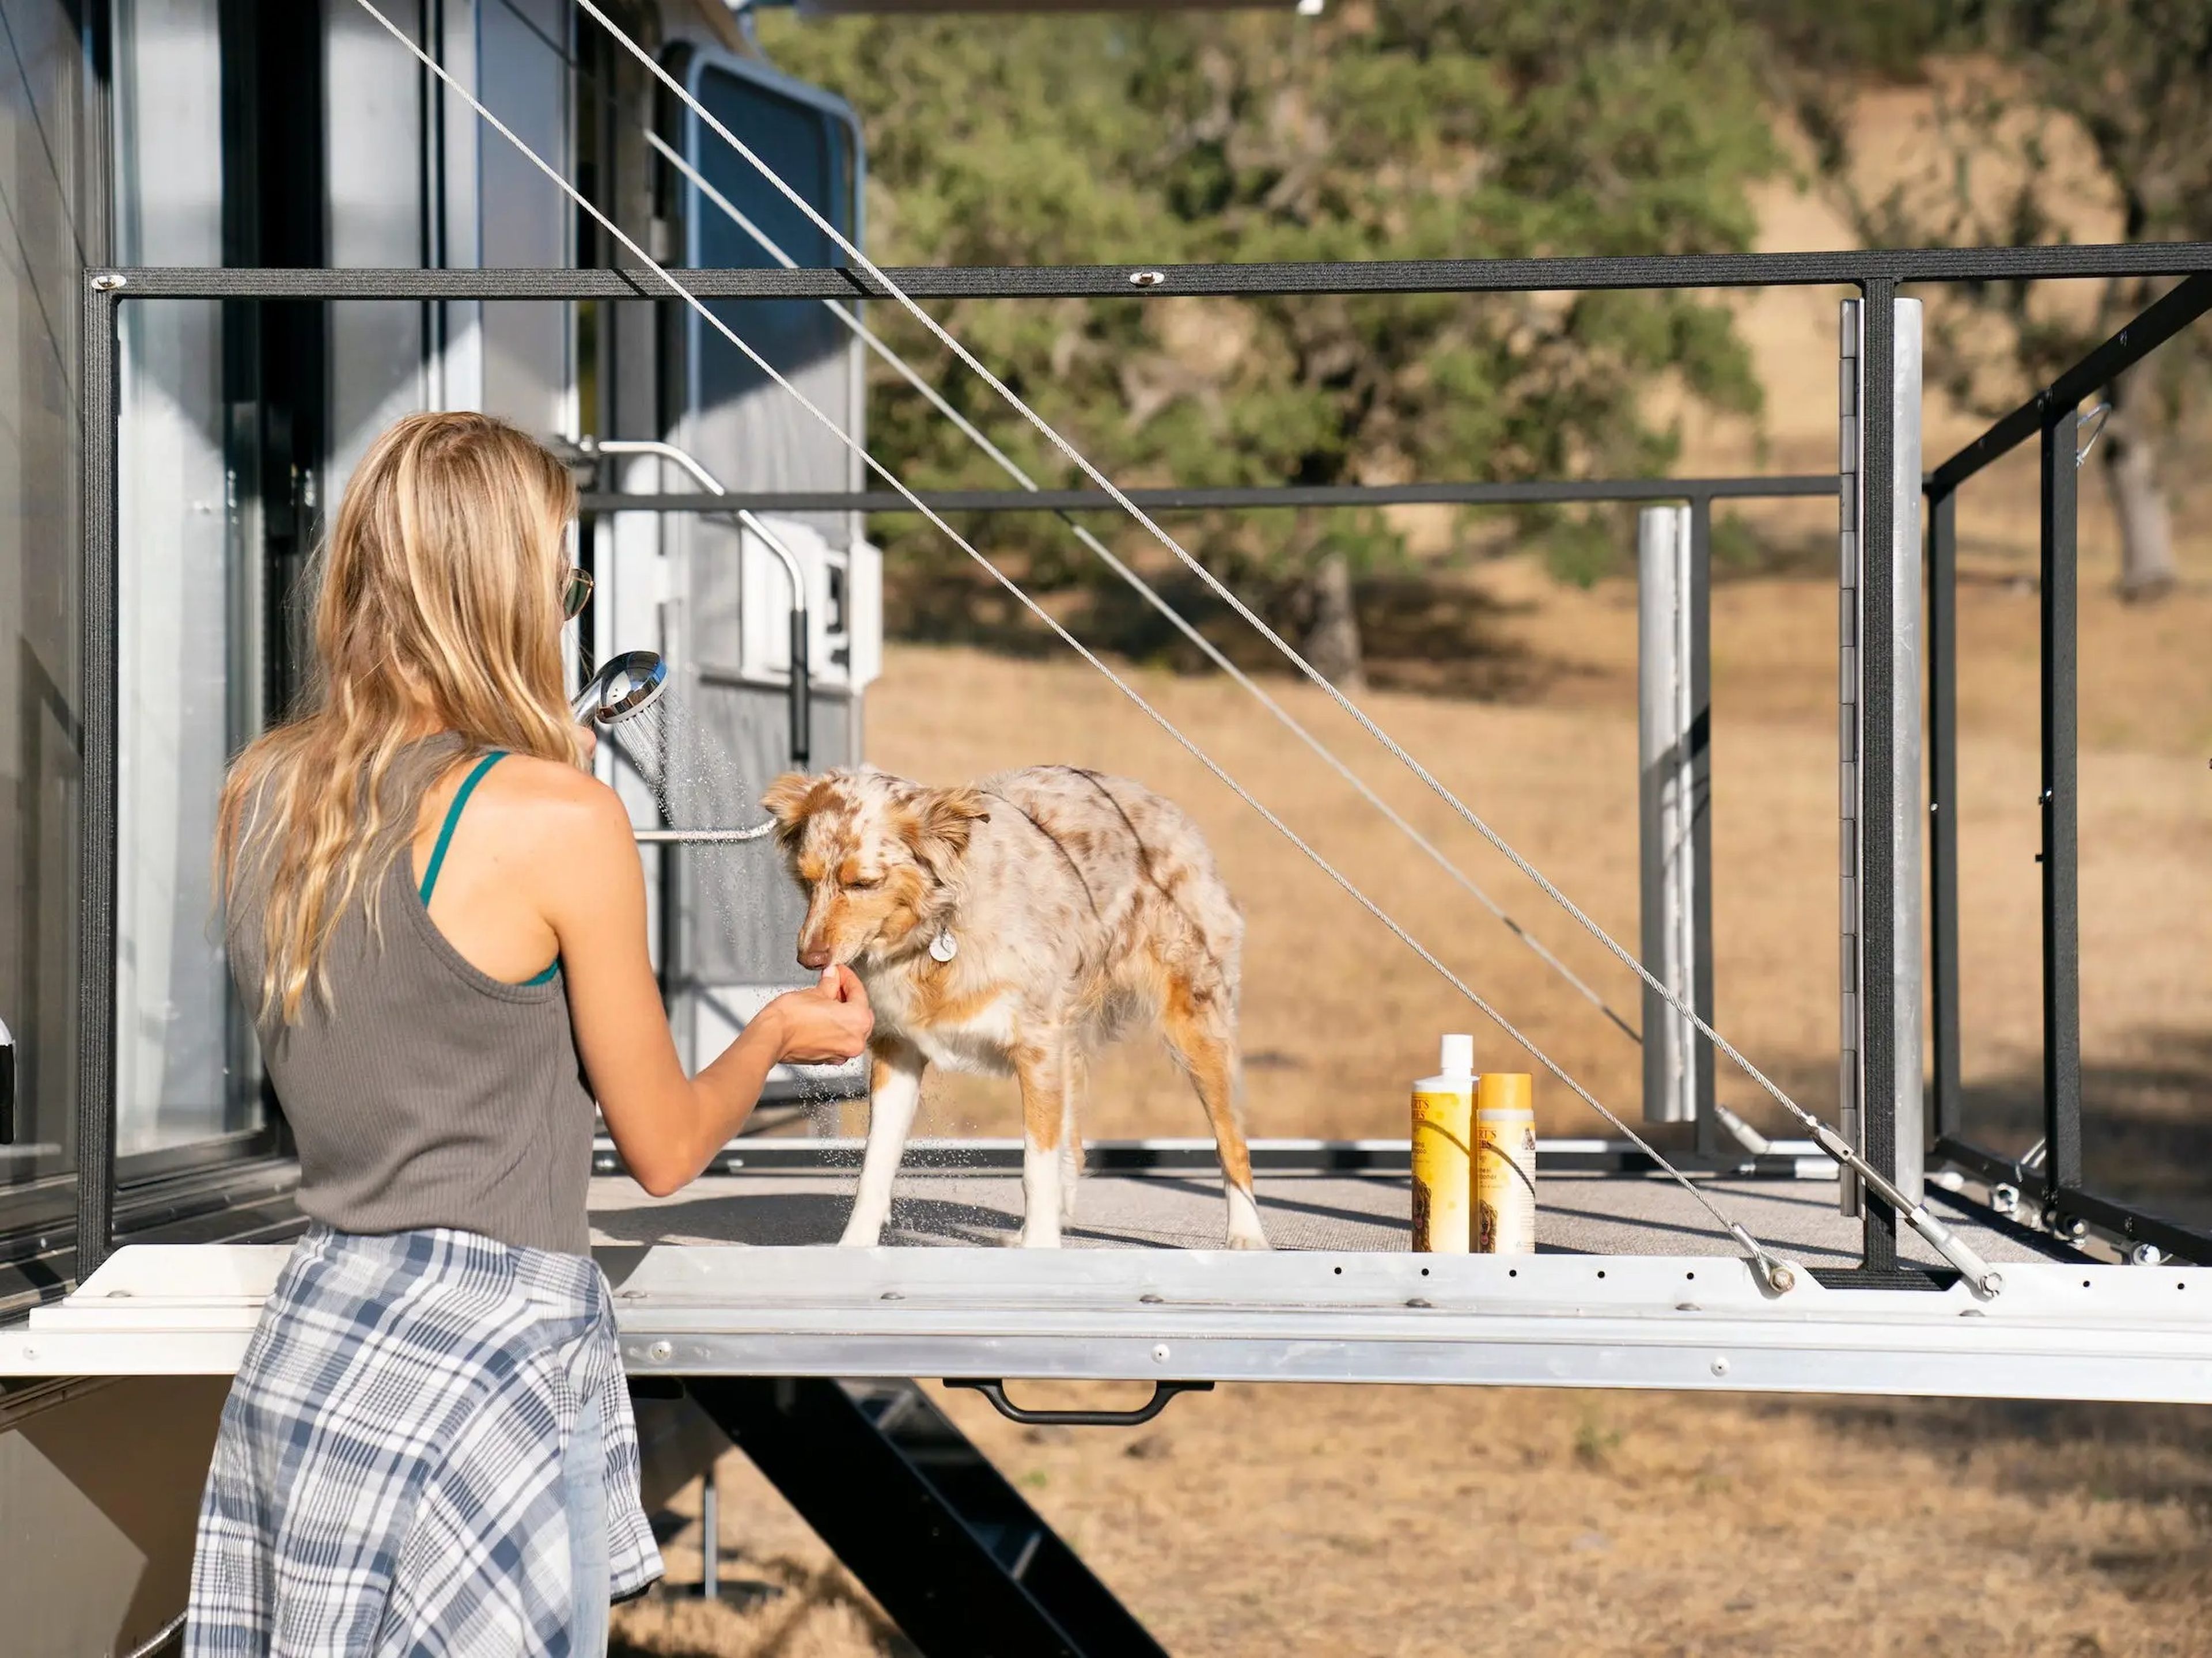 A person washing a dog on the travel trailer's deck